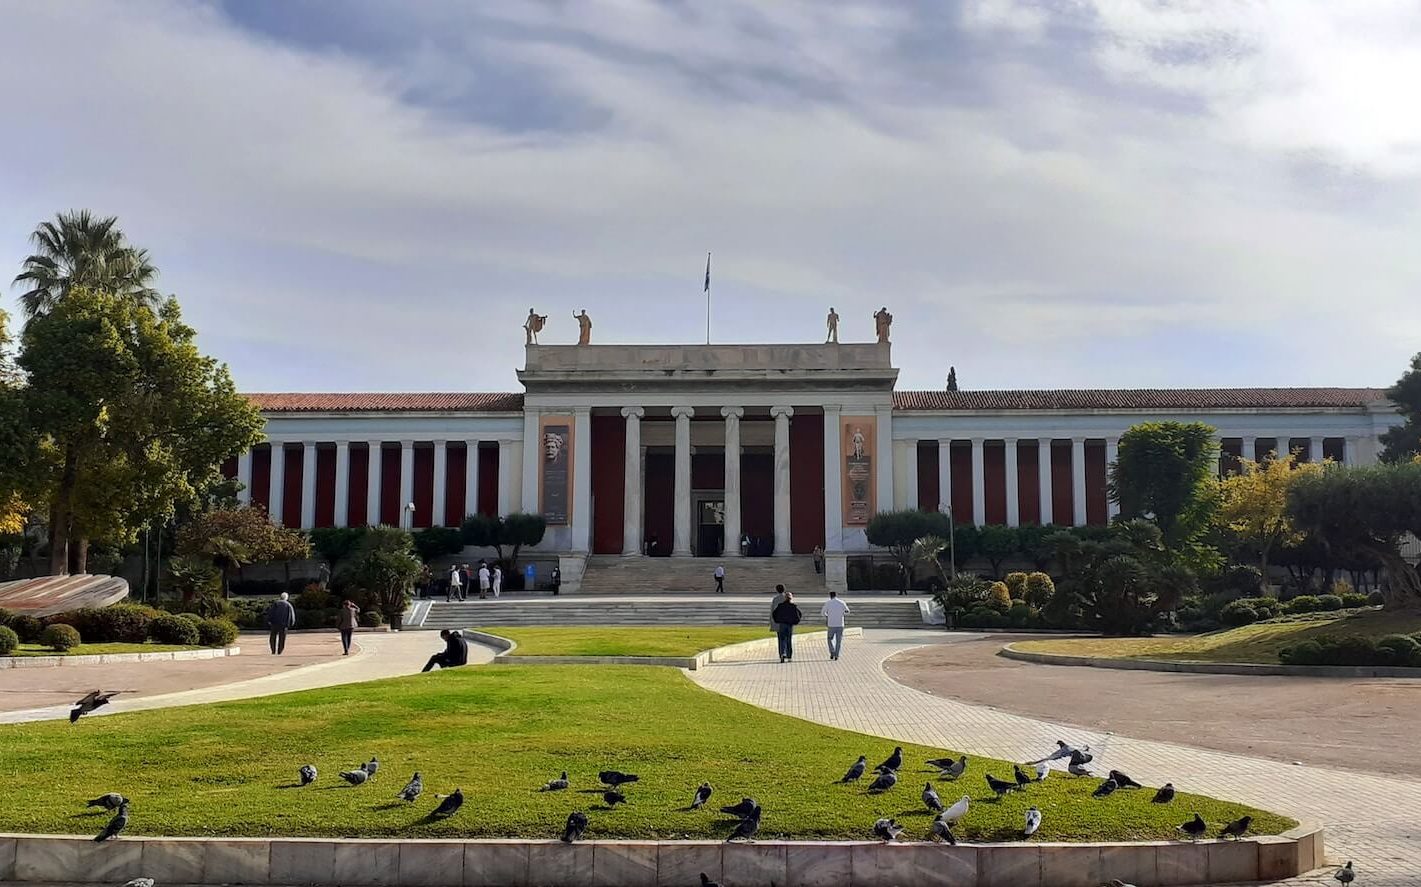 The National Archaeological Museum in Athens, home to an extensive collection of artifacts that showcase Greece's rich history.